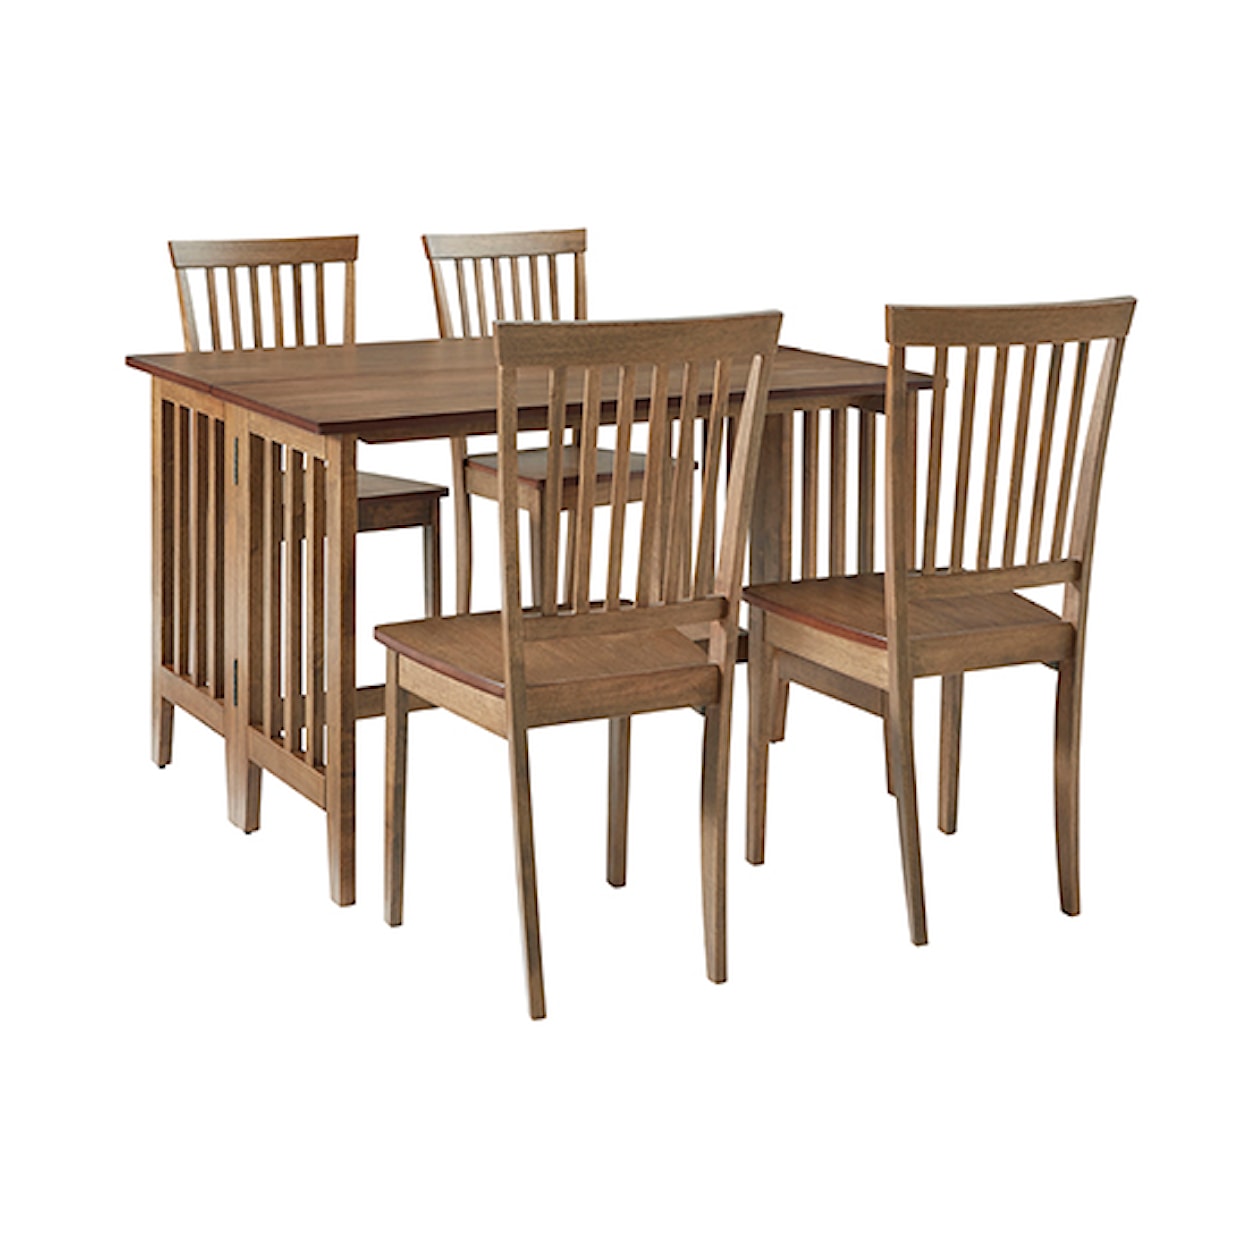 Progressive Furniture Southport Dining Chair